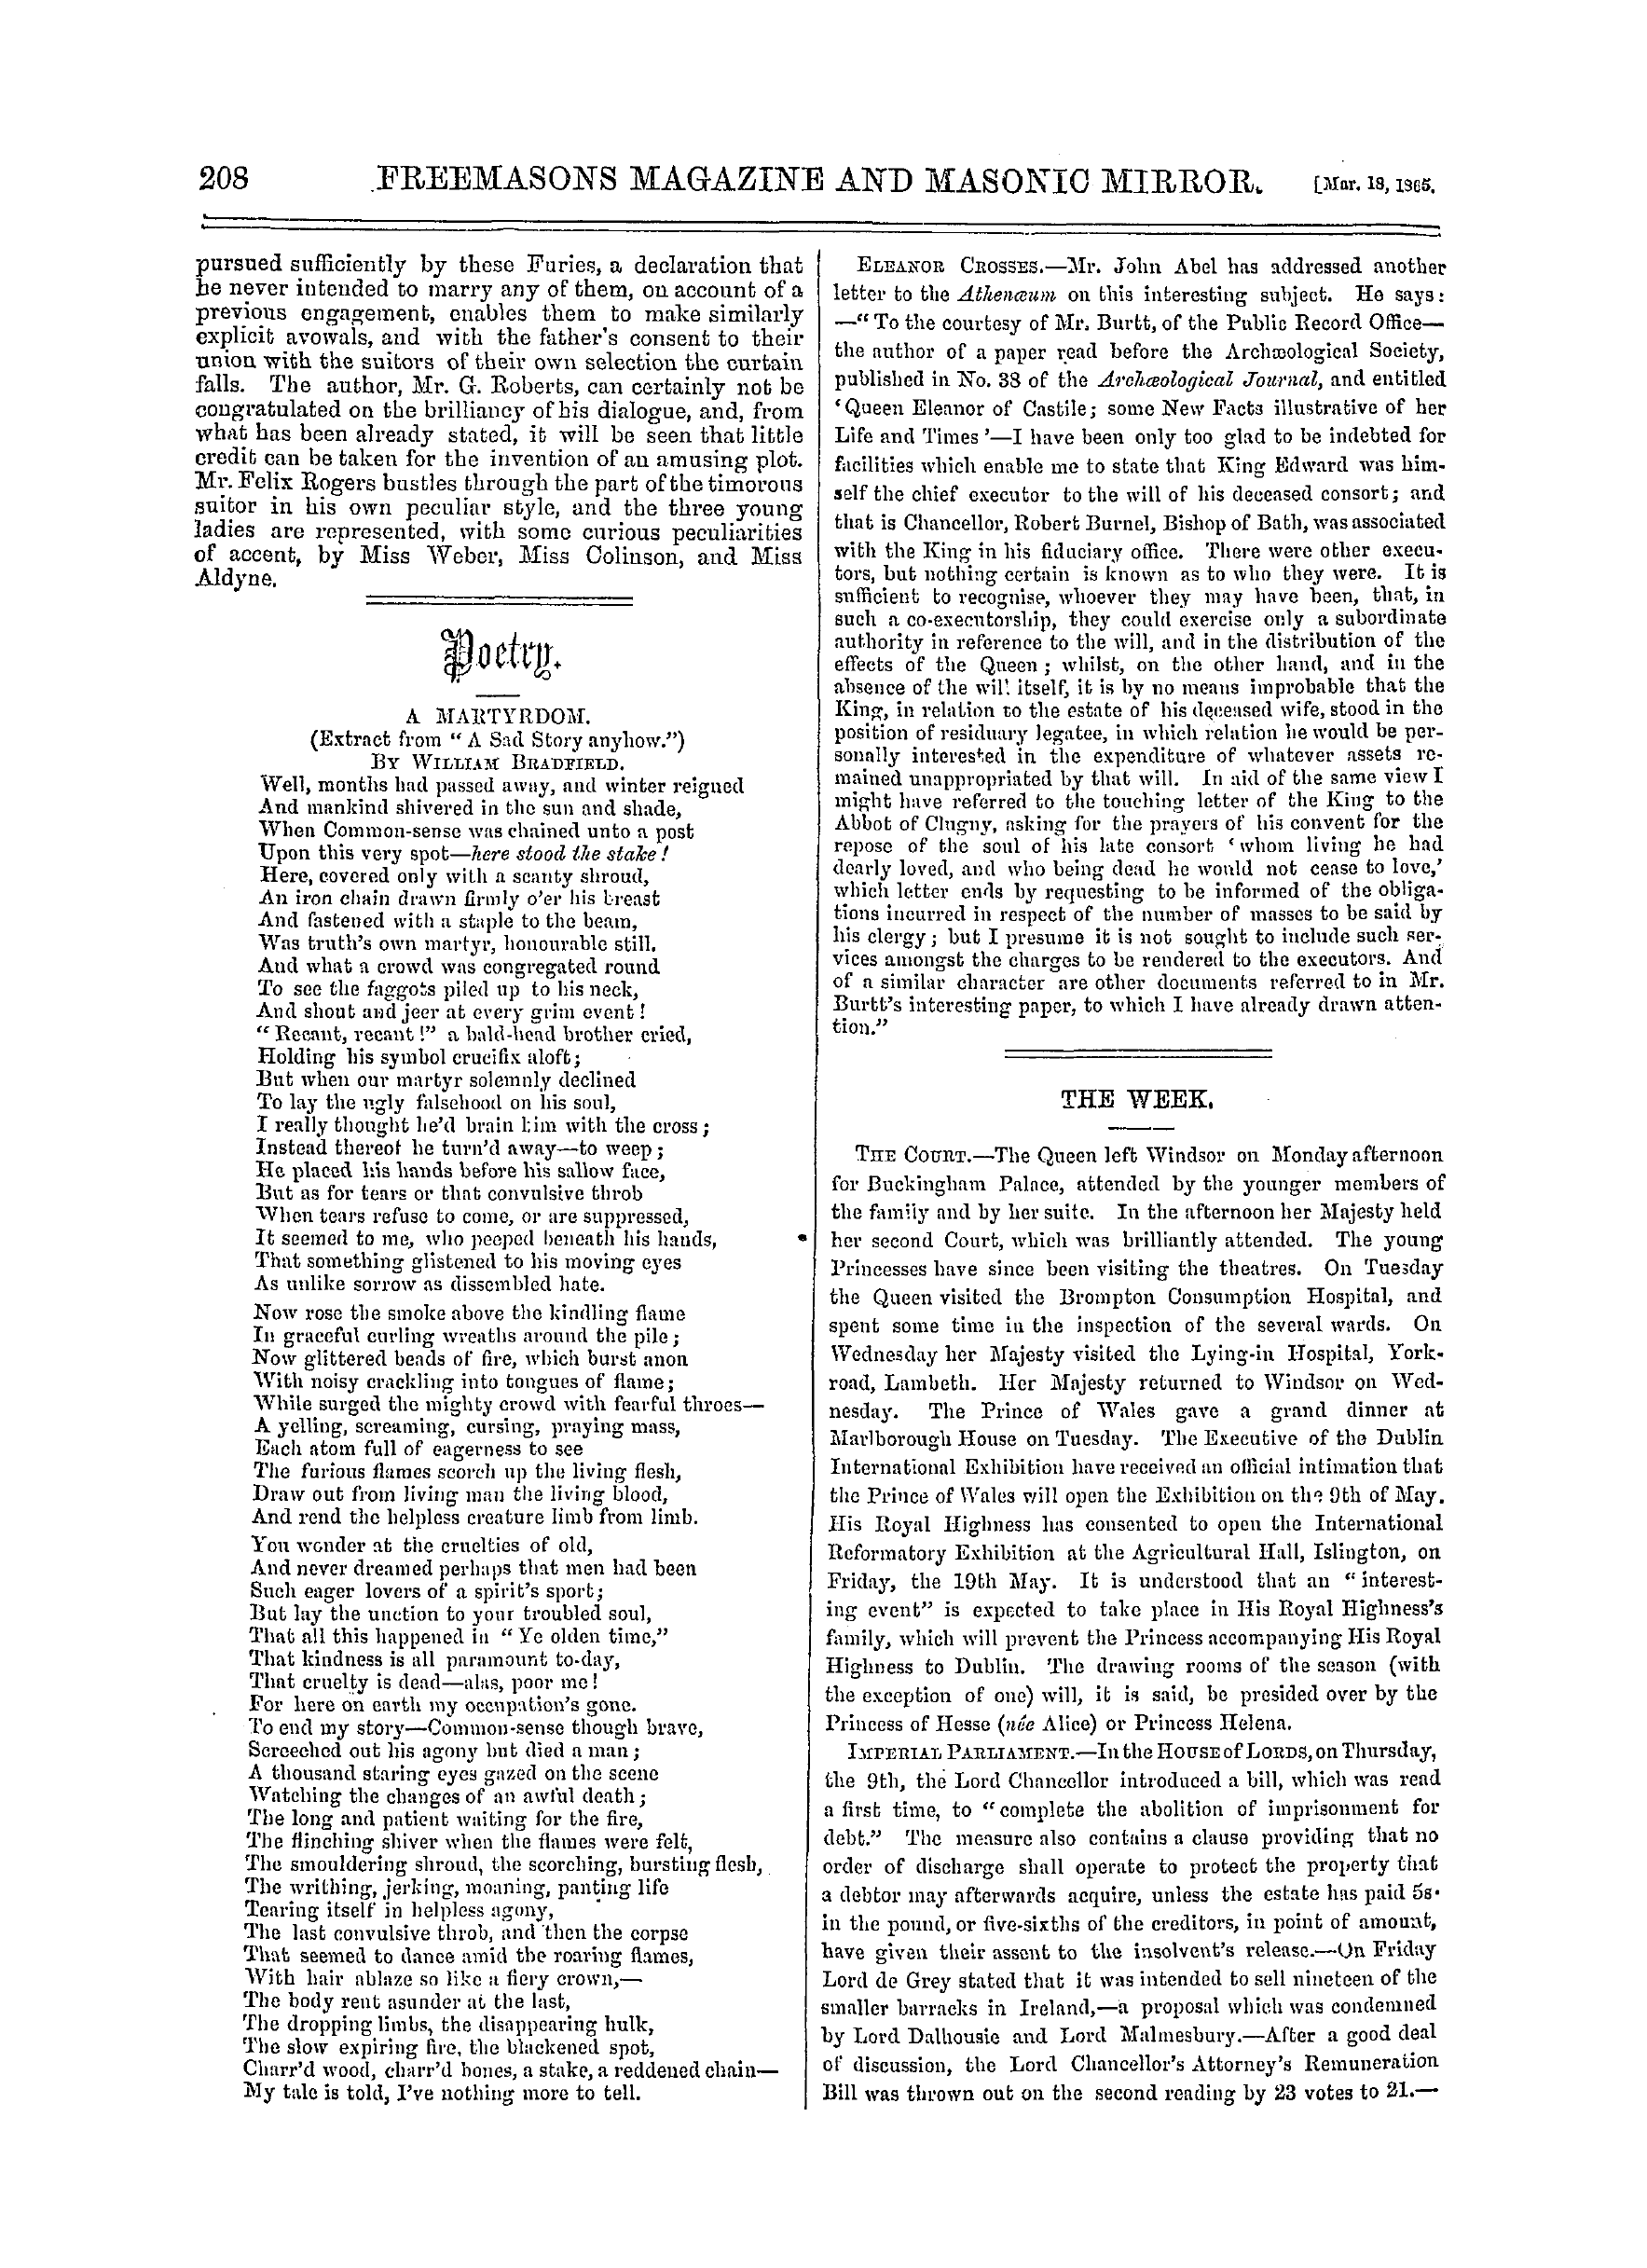 Page 16